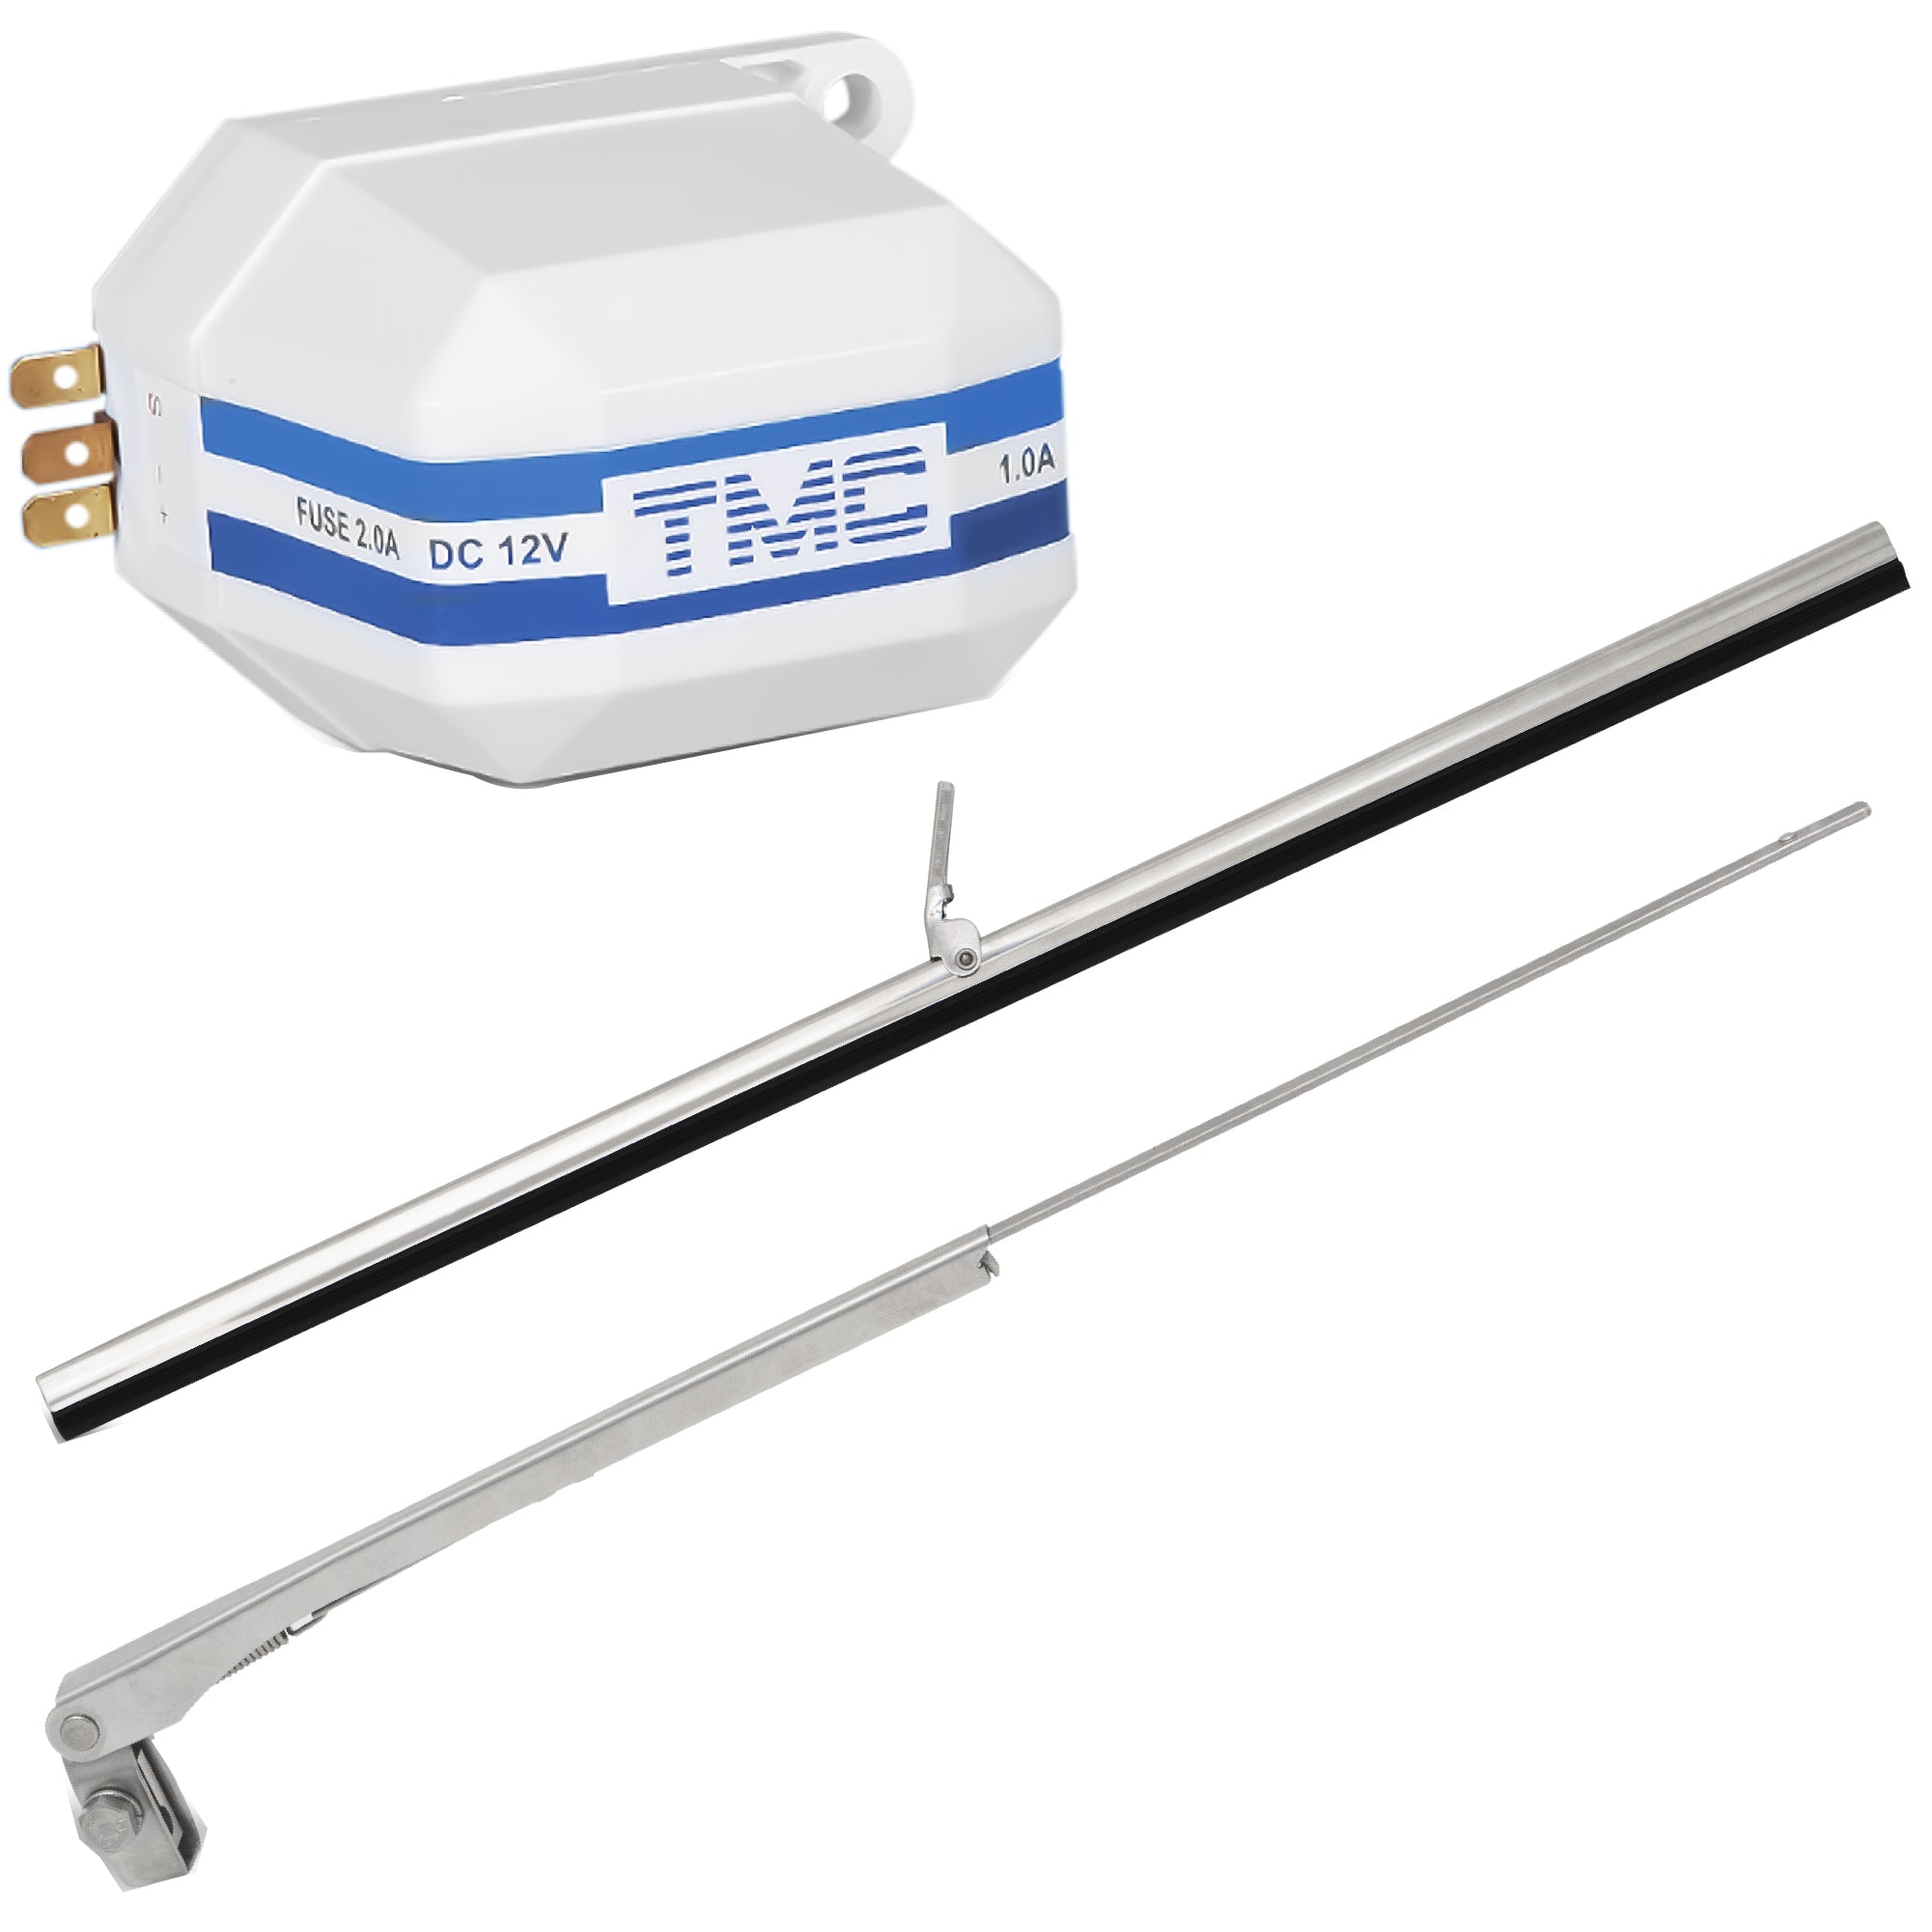 TMC Windshield Complete System Kit - FO745-C1